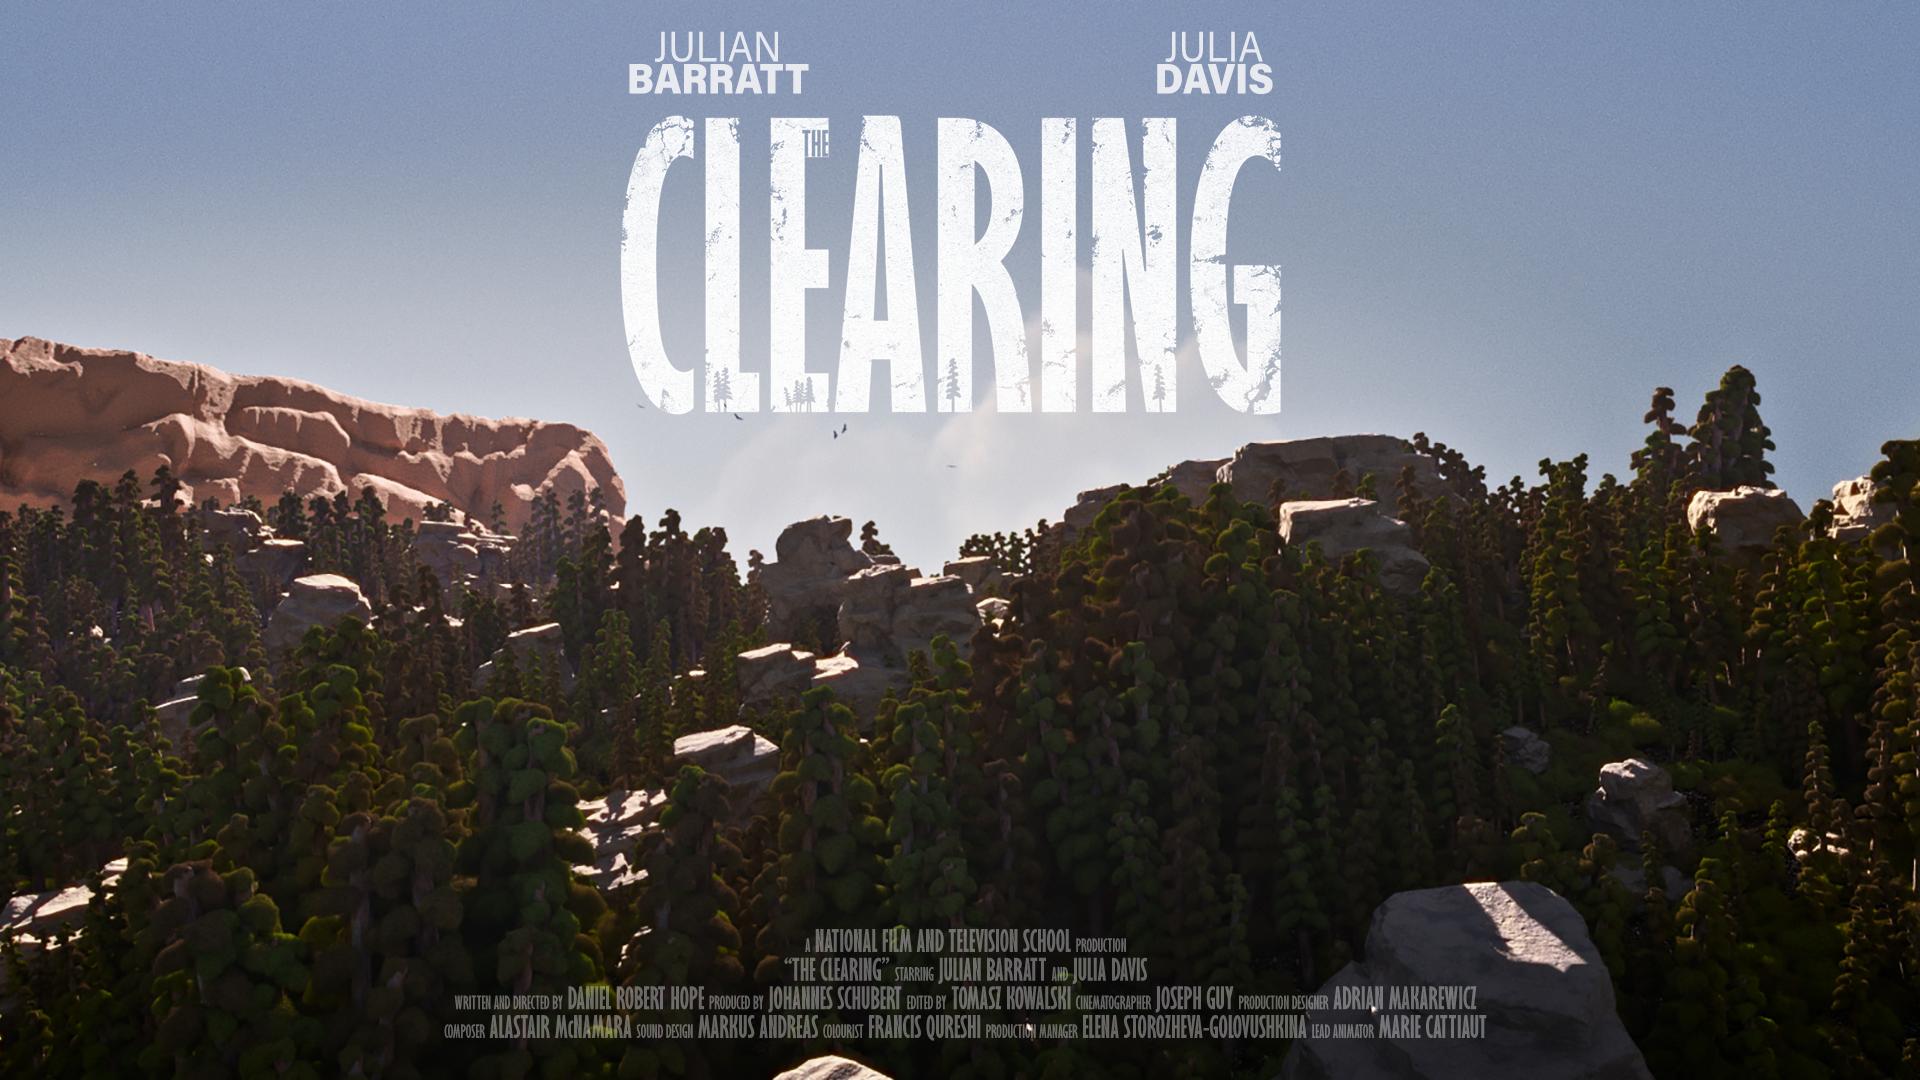 THE CLEARING